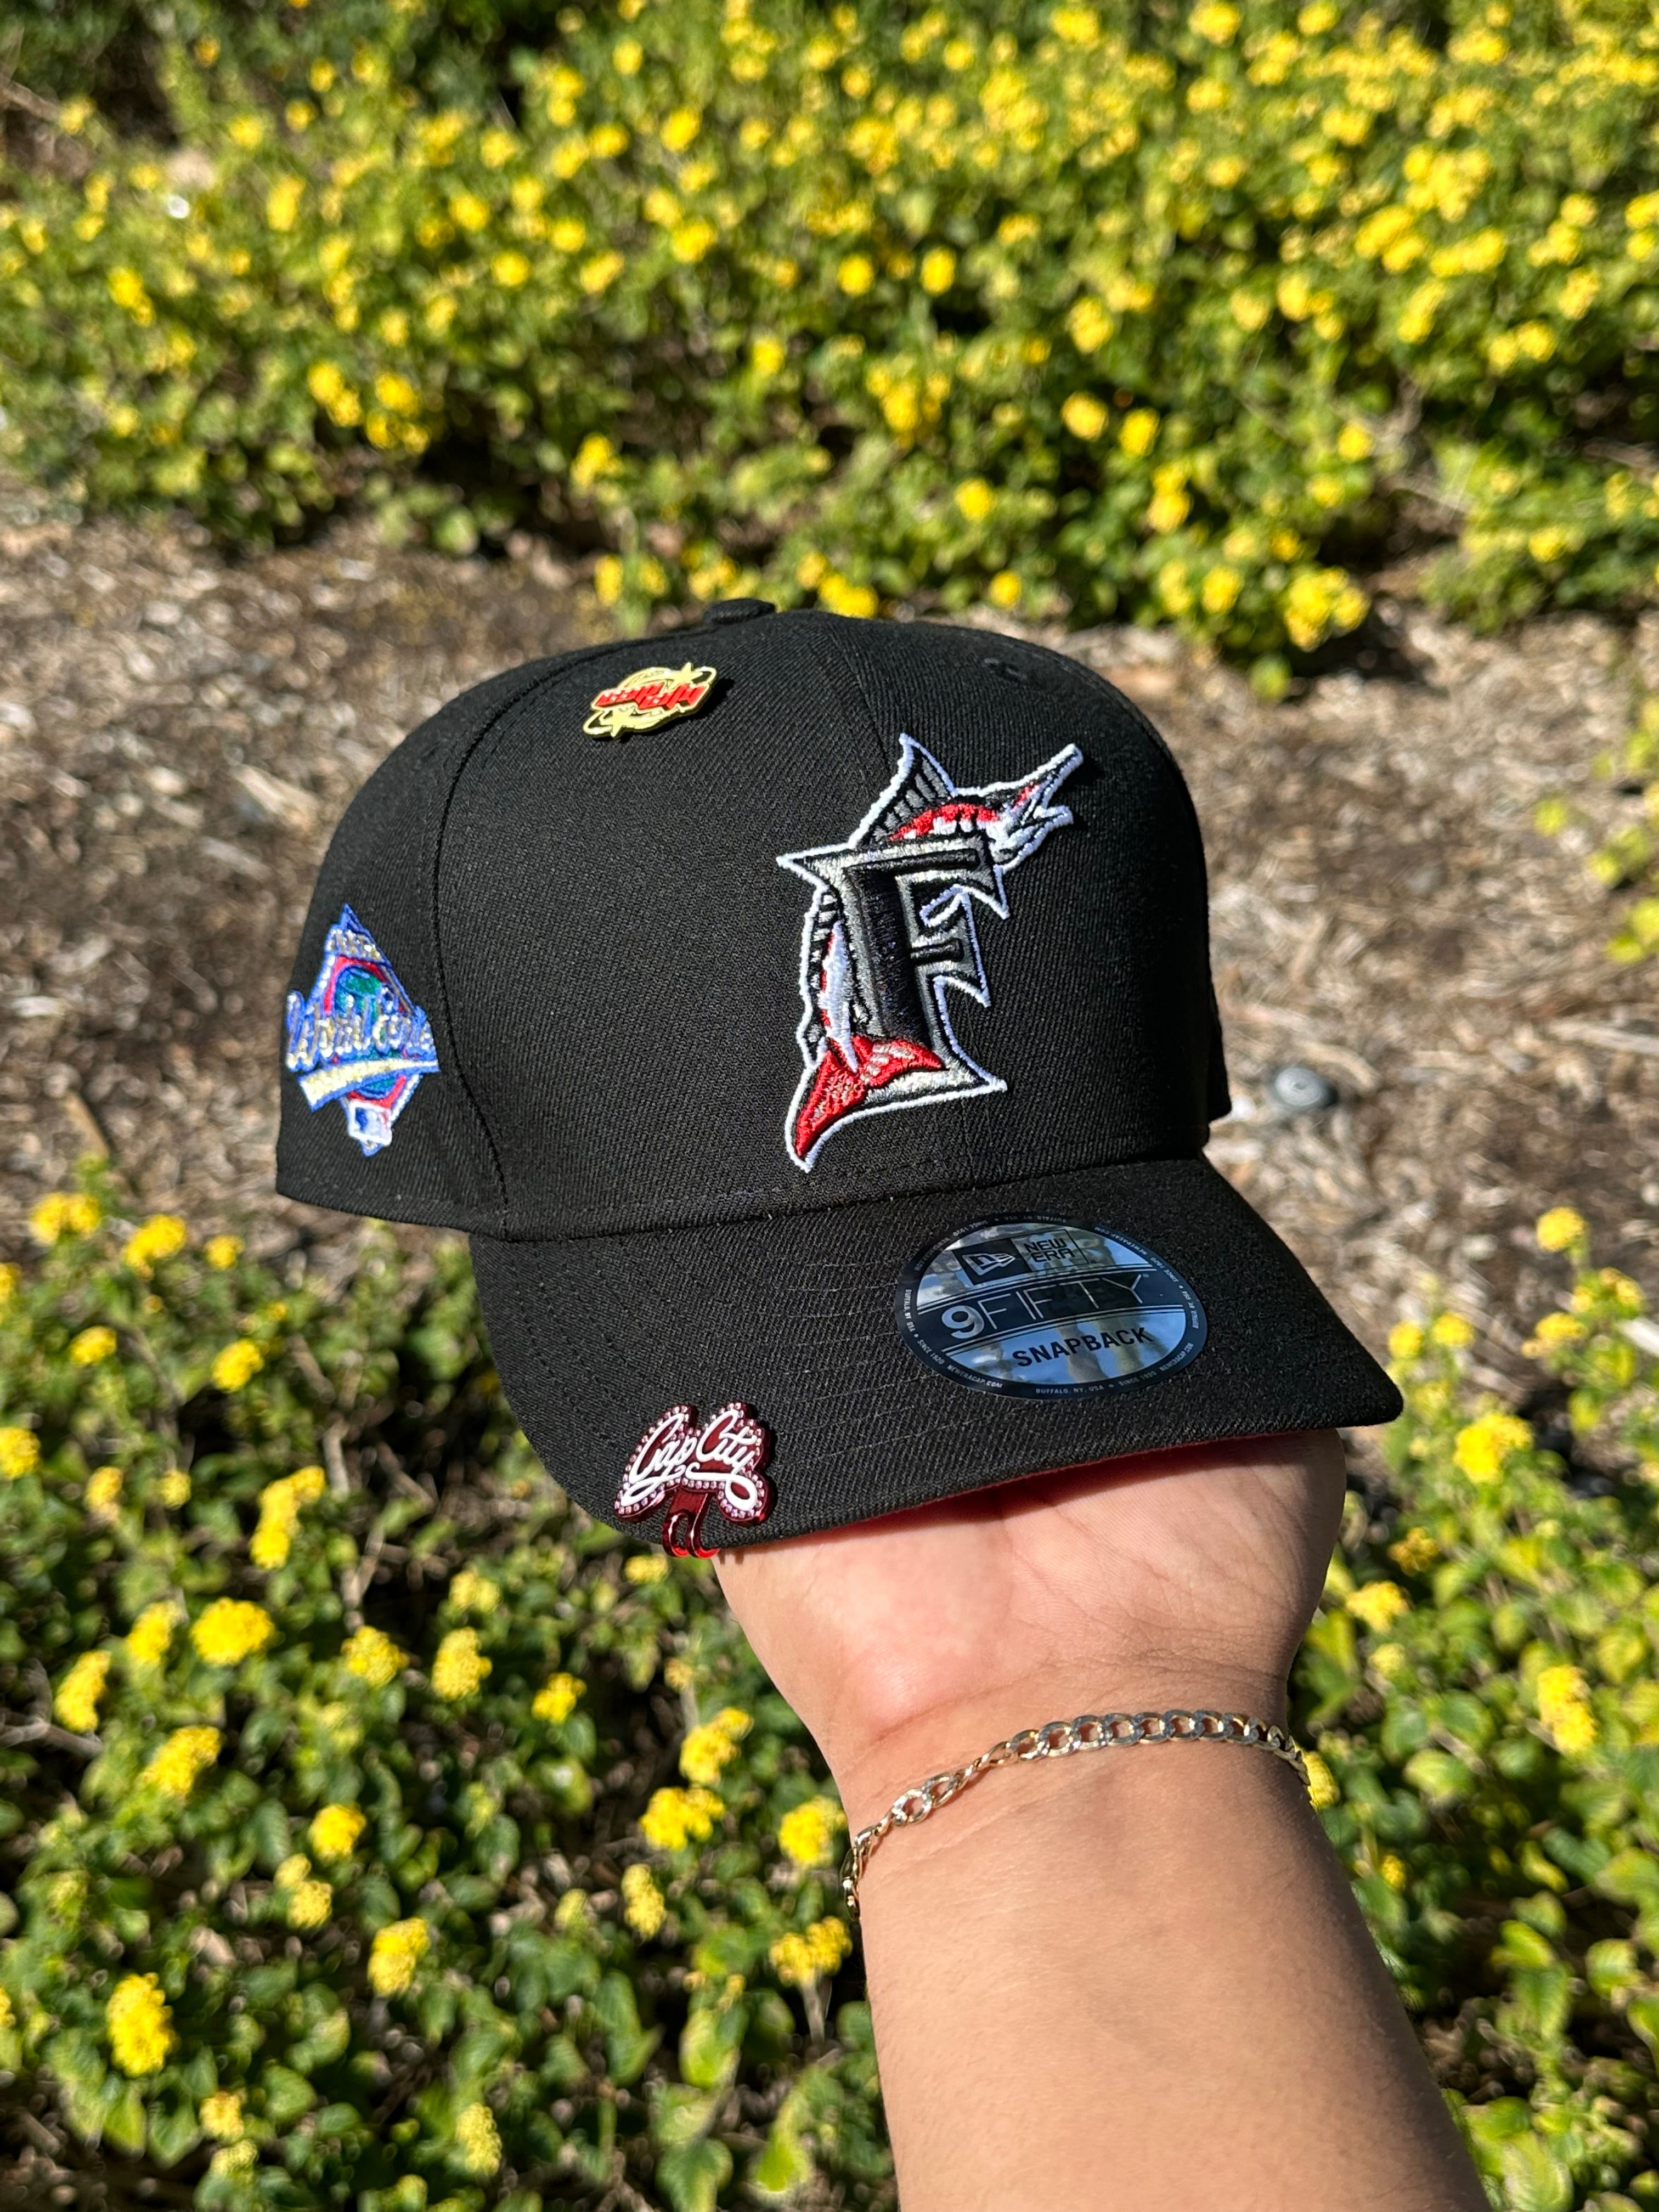 NEW ERA EXCLUSIVE 9FIFTY BLACK FLORIDA MARLINS SNAPBACK W/ 1997 WORLD SERIES SIDE PATCH